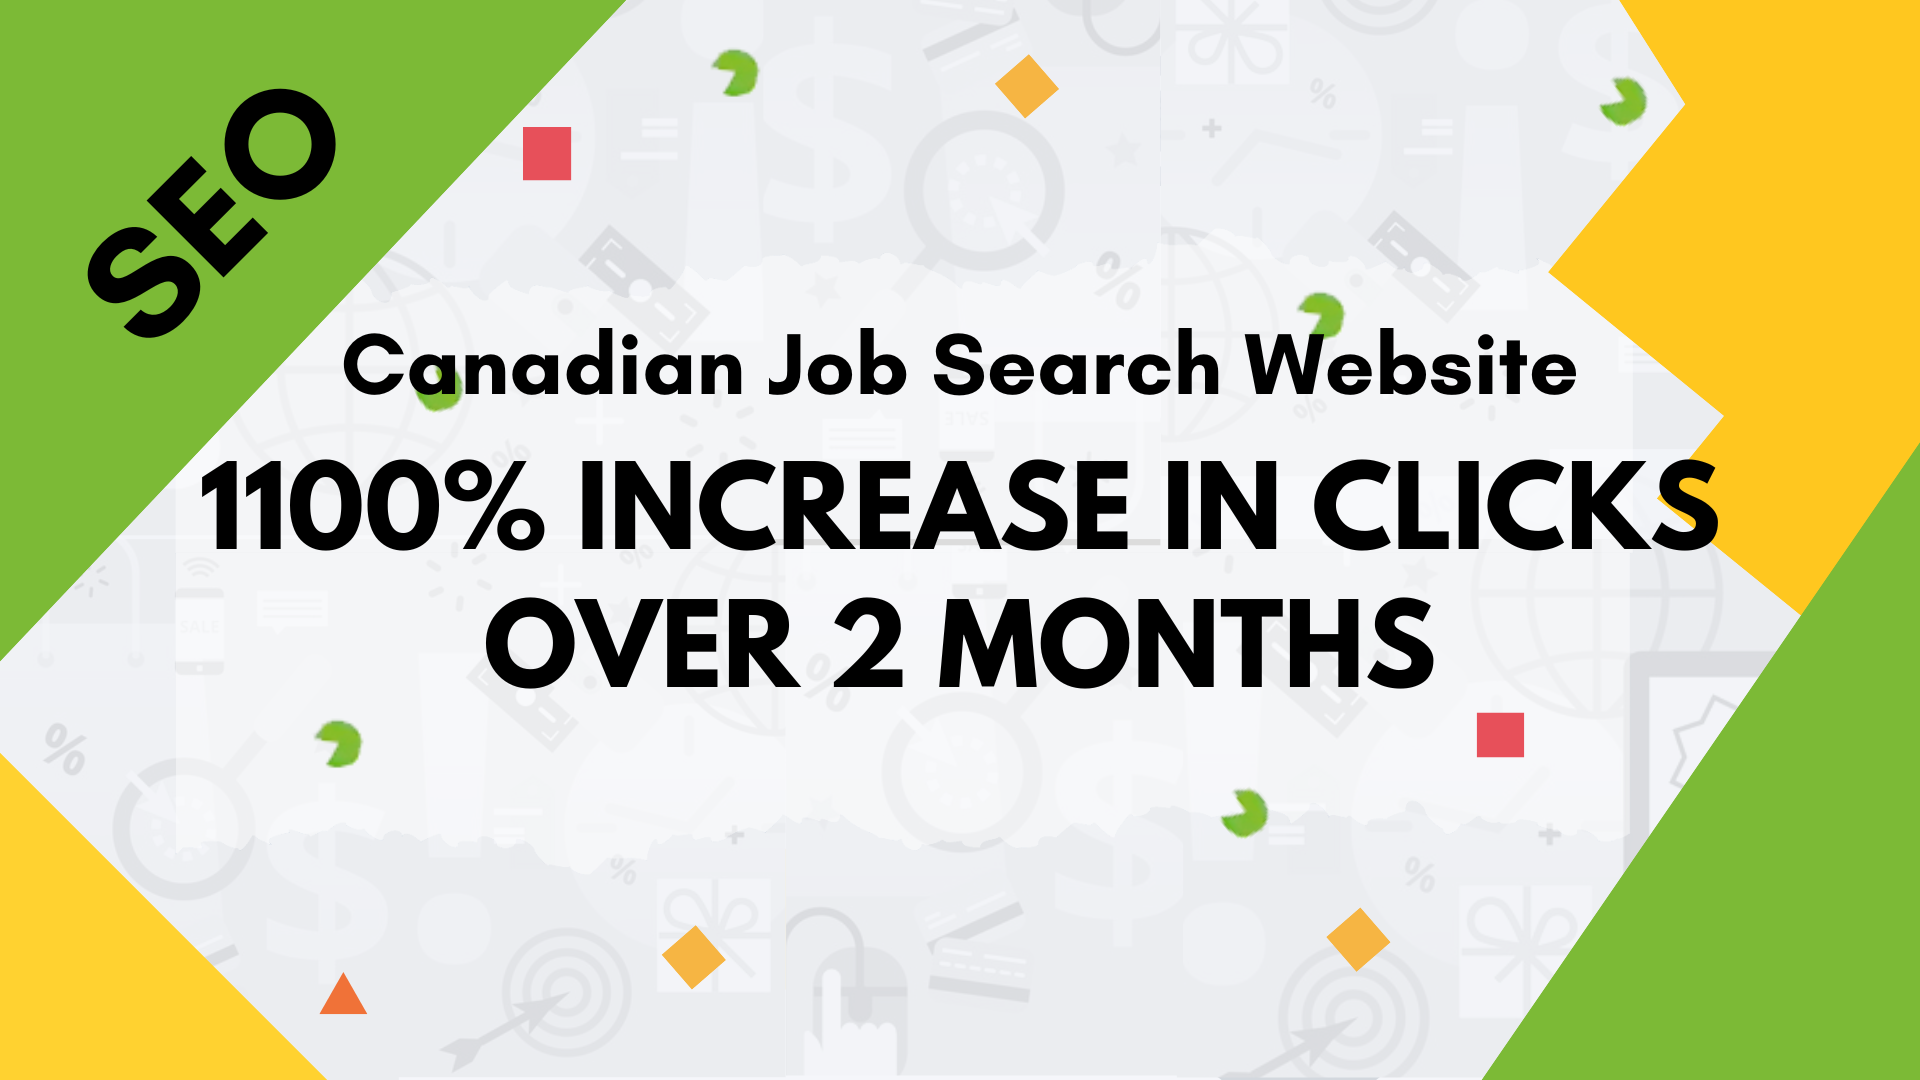 Canadian Job Search Website